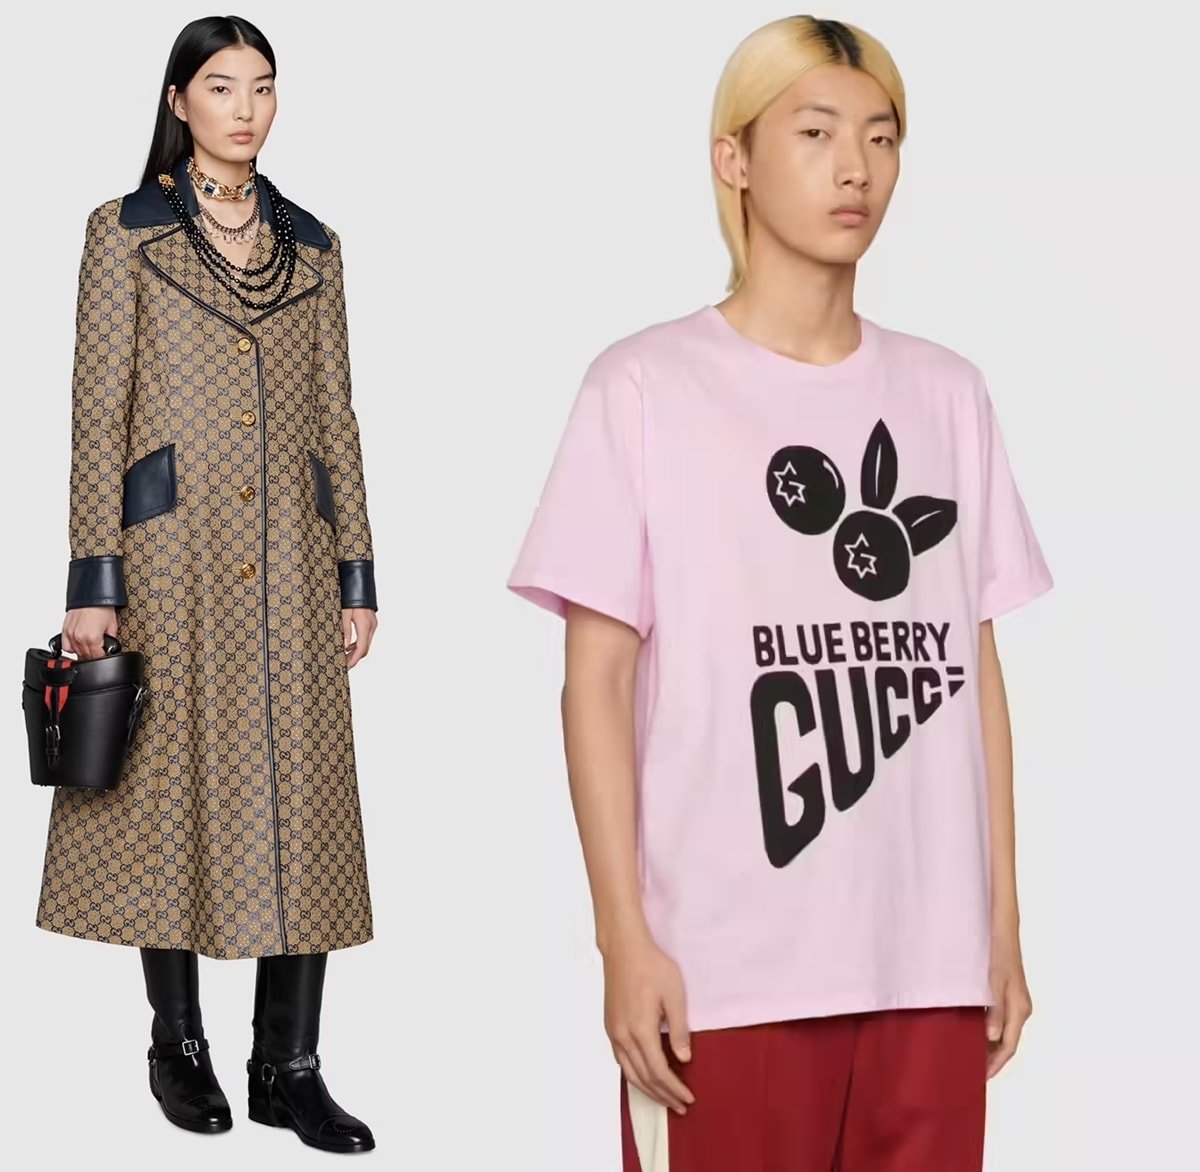 GG canvas coat with crystals and 'Blueberry Gucci' cotton T-shirt from the Italian luxury fashion house Gucci